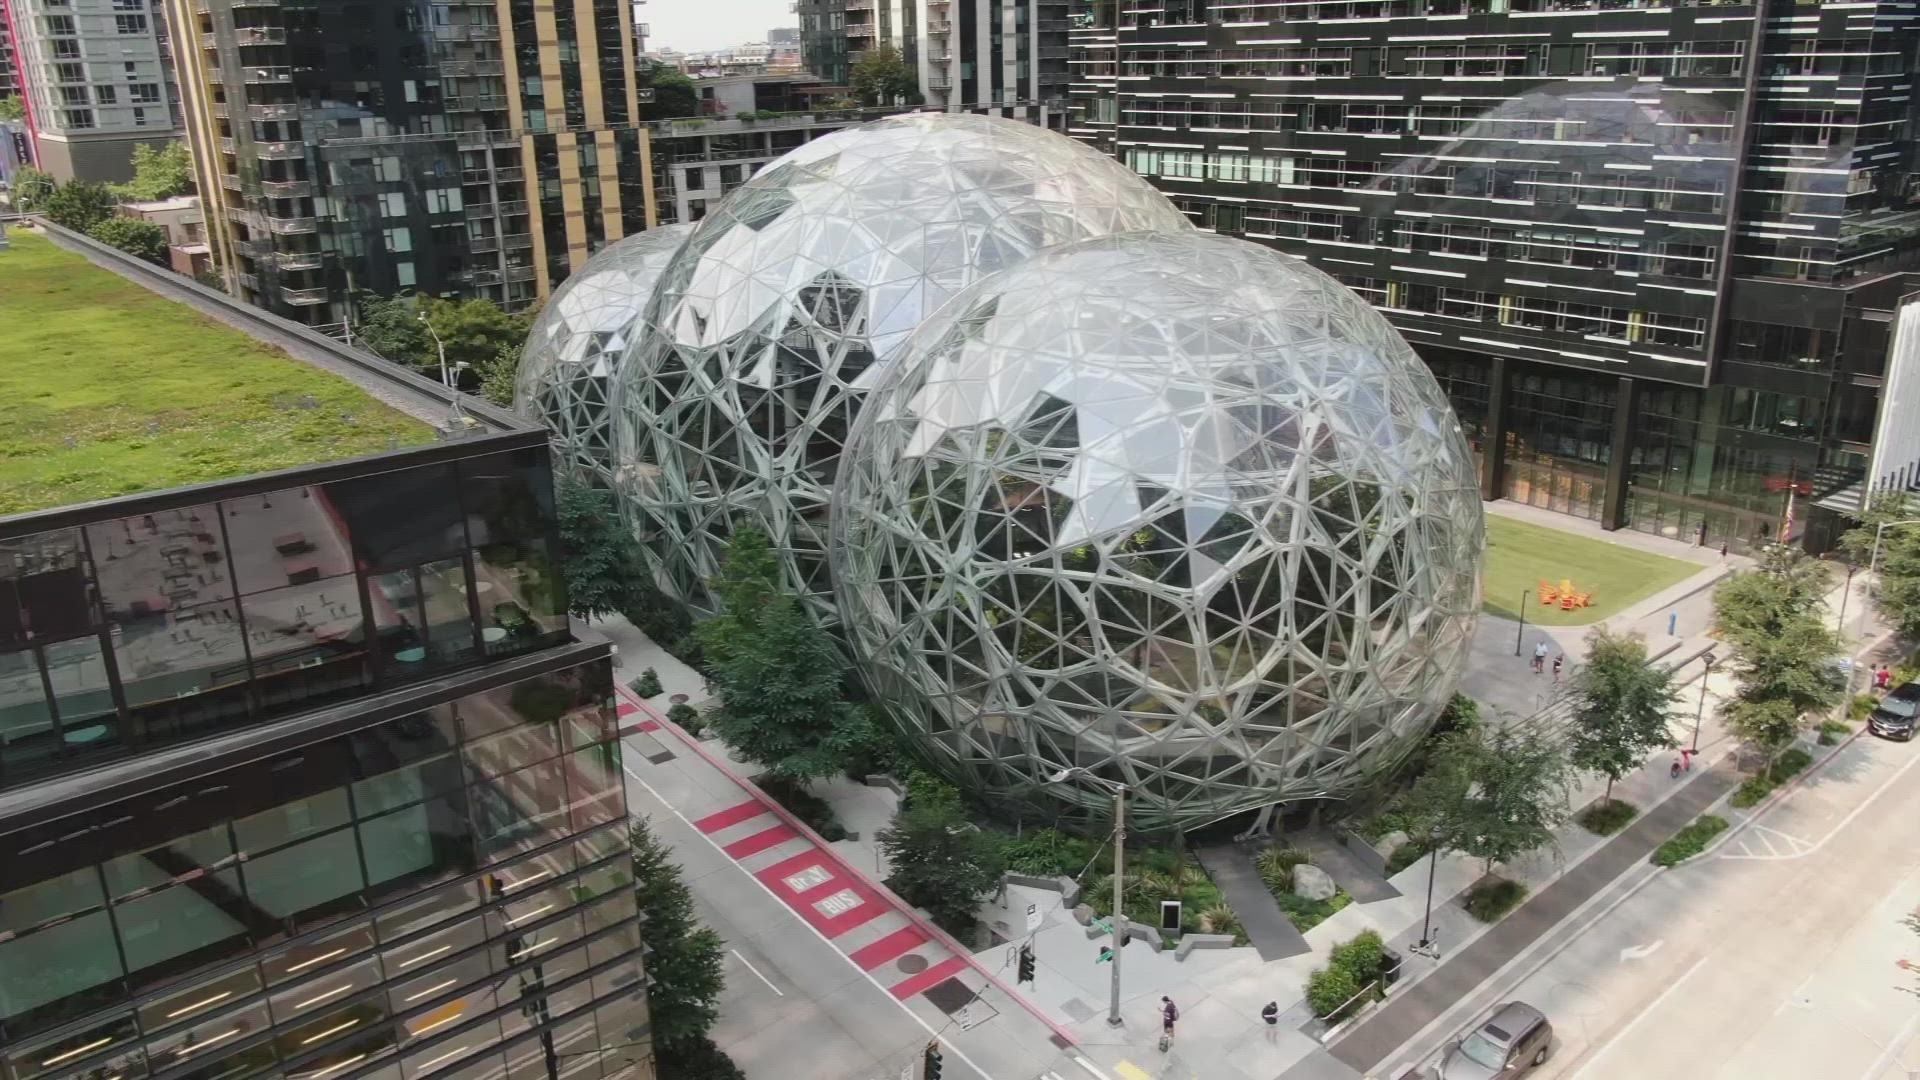 Dexter, the KING 5 drone, captures footage of the Amazon Spheres in Seattle's South Lake Union neighborhood on Aug. 5, 2021.